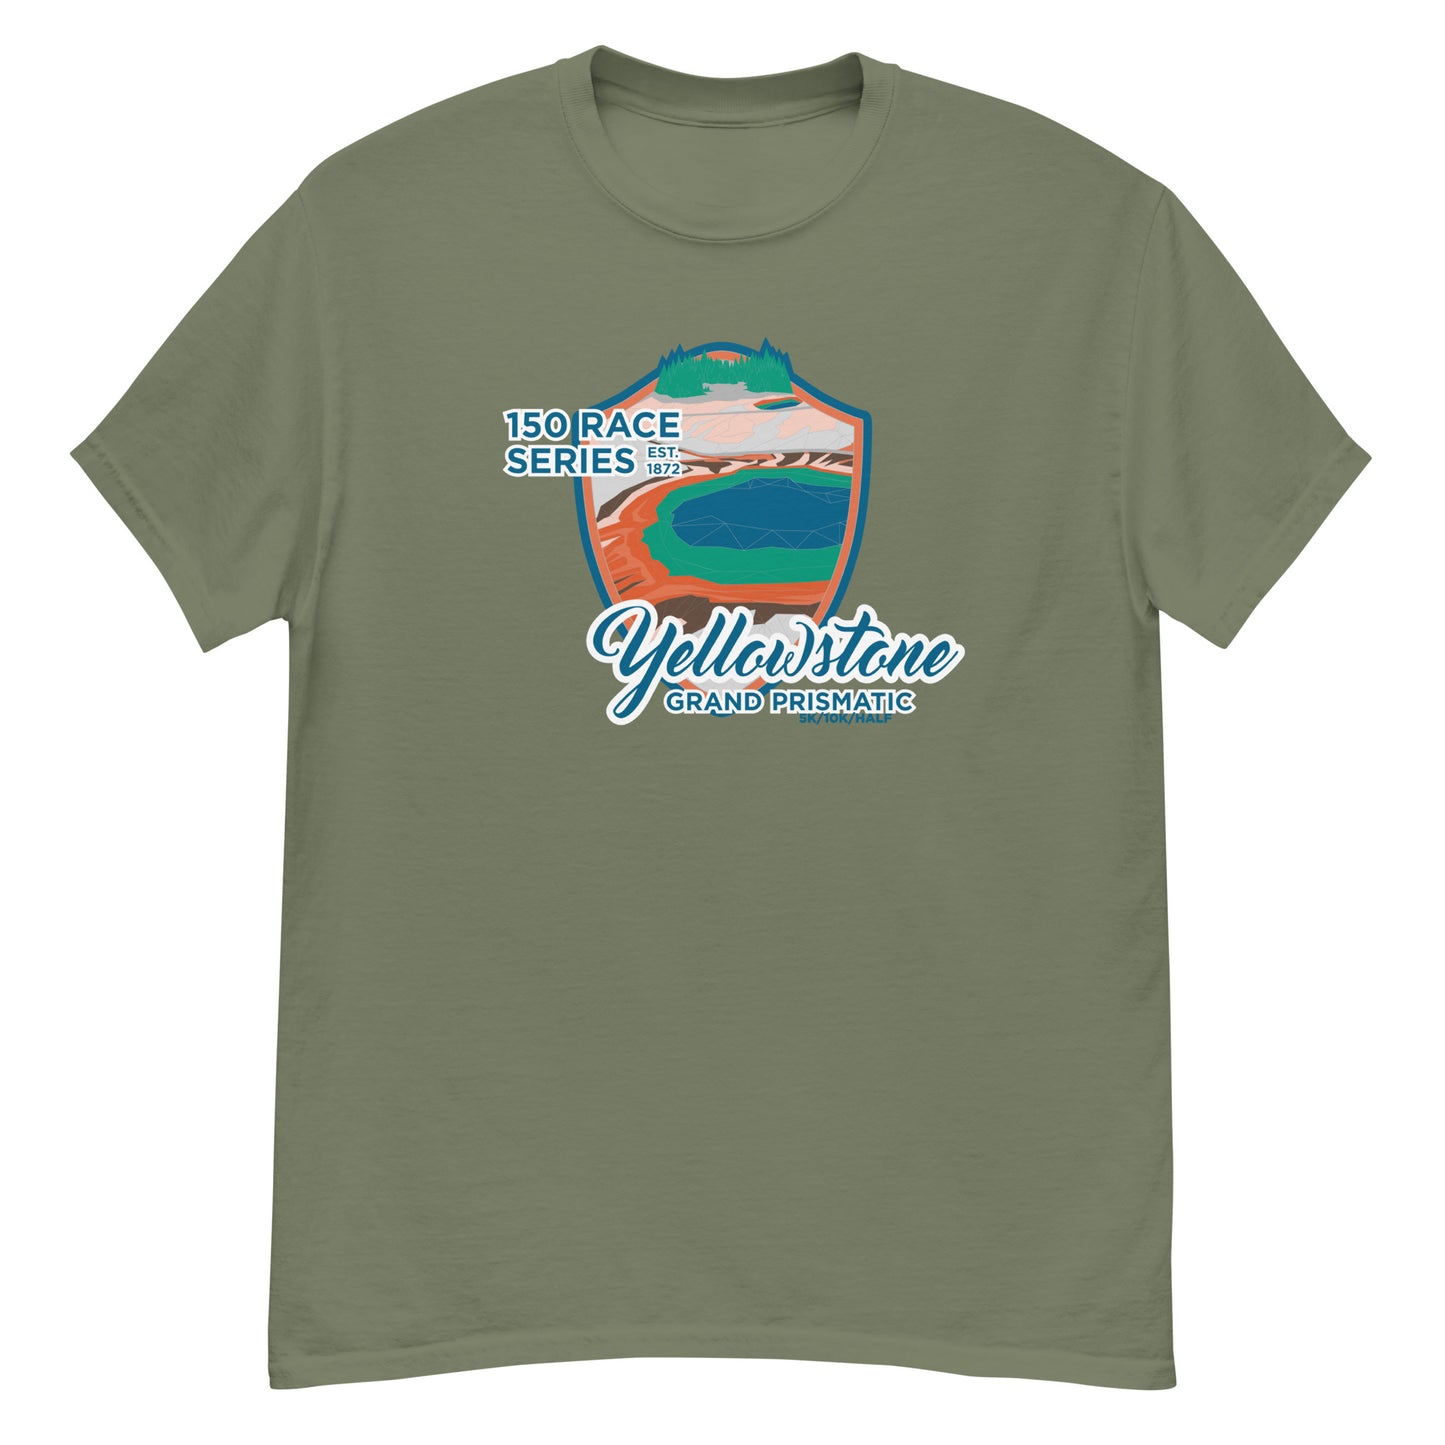 Classic Everyday Grand Prismatic Race Tee - 150 Years of Yellowstone